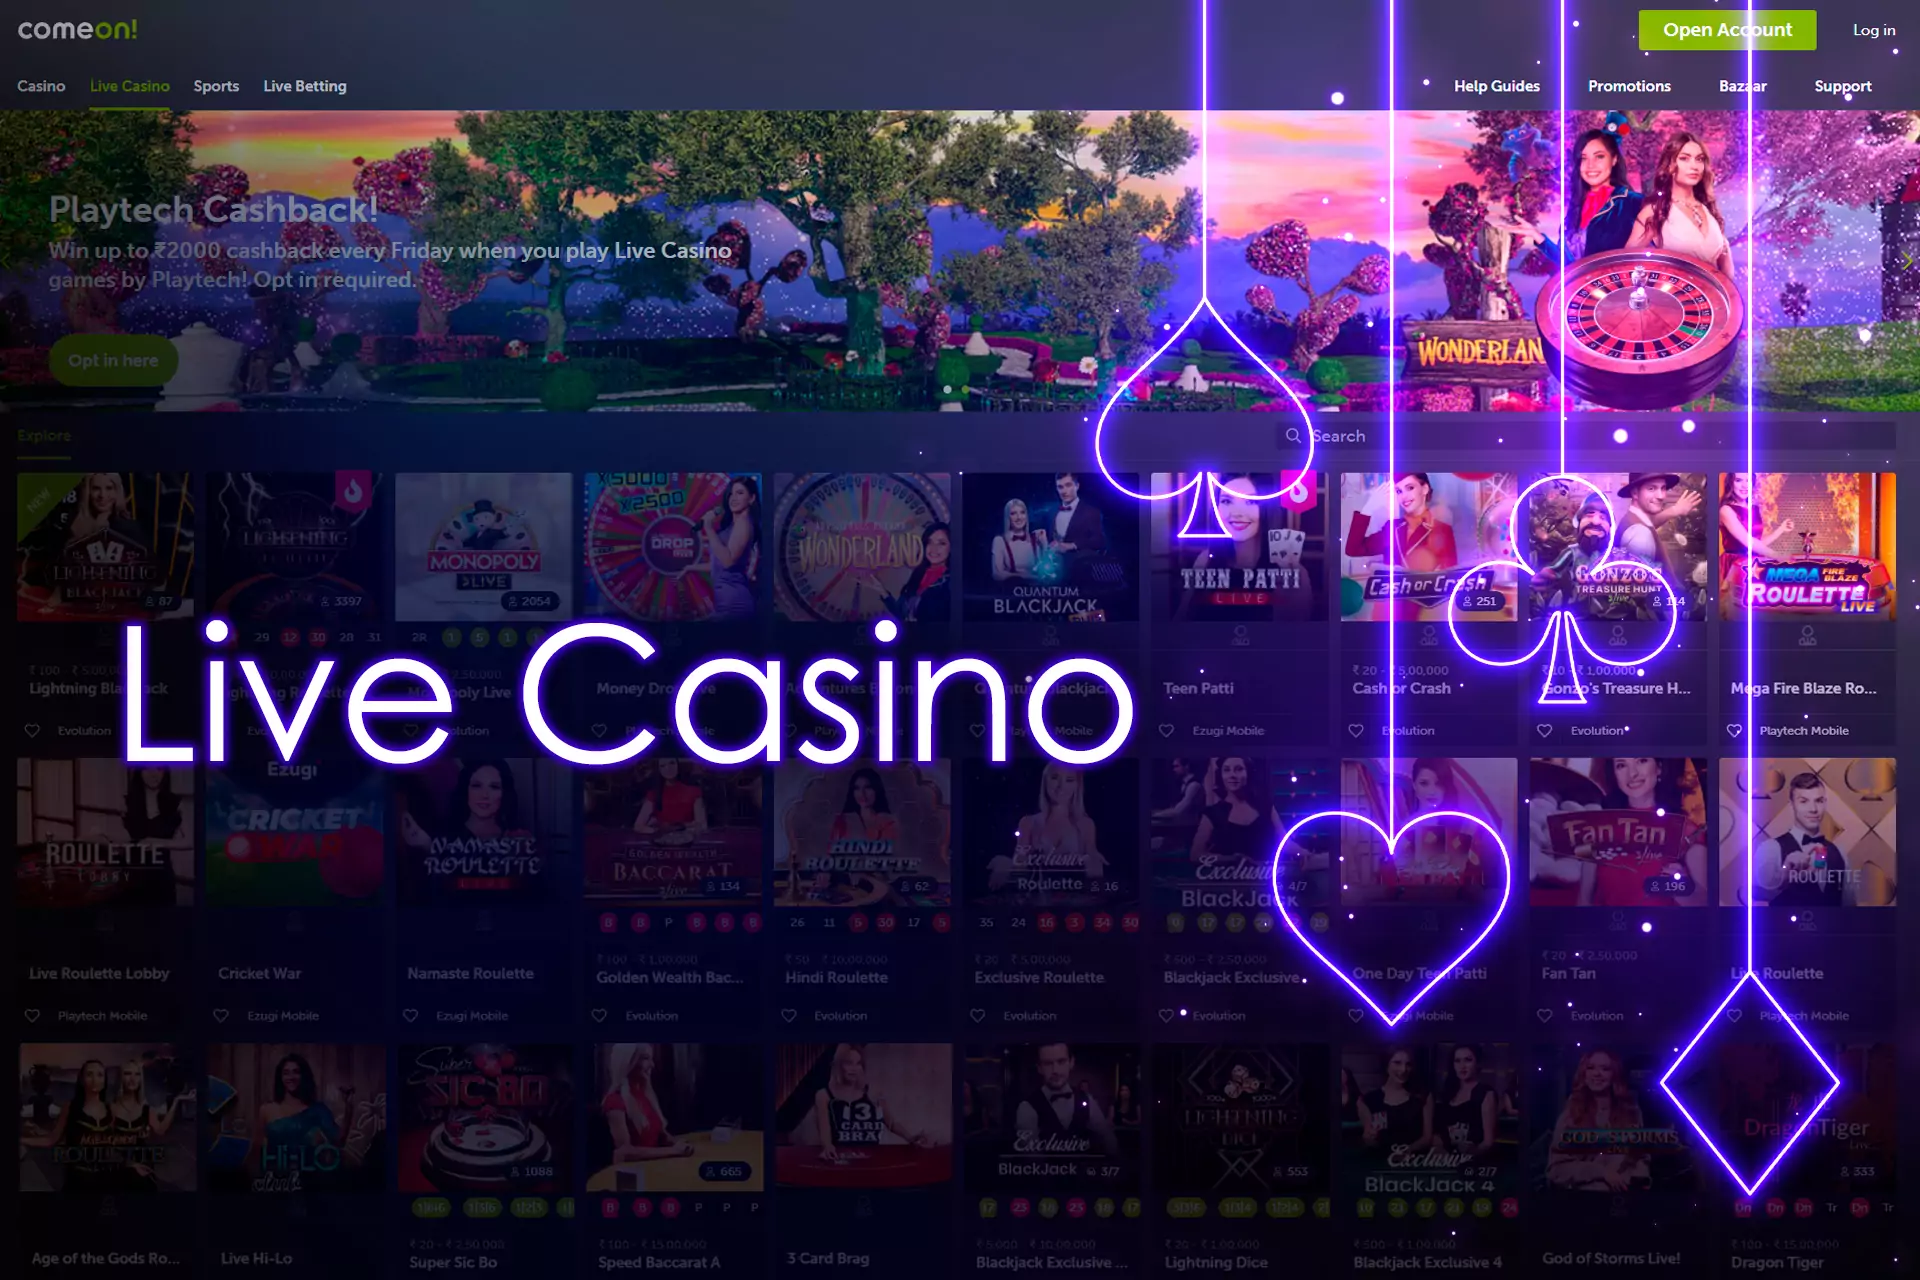 In the Live Casino section, you can play games with a live dealer online.